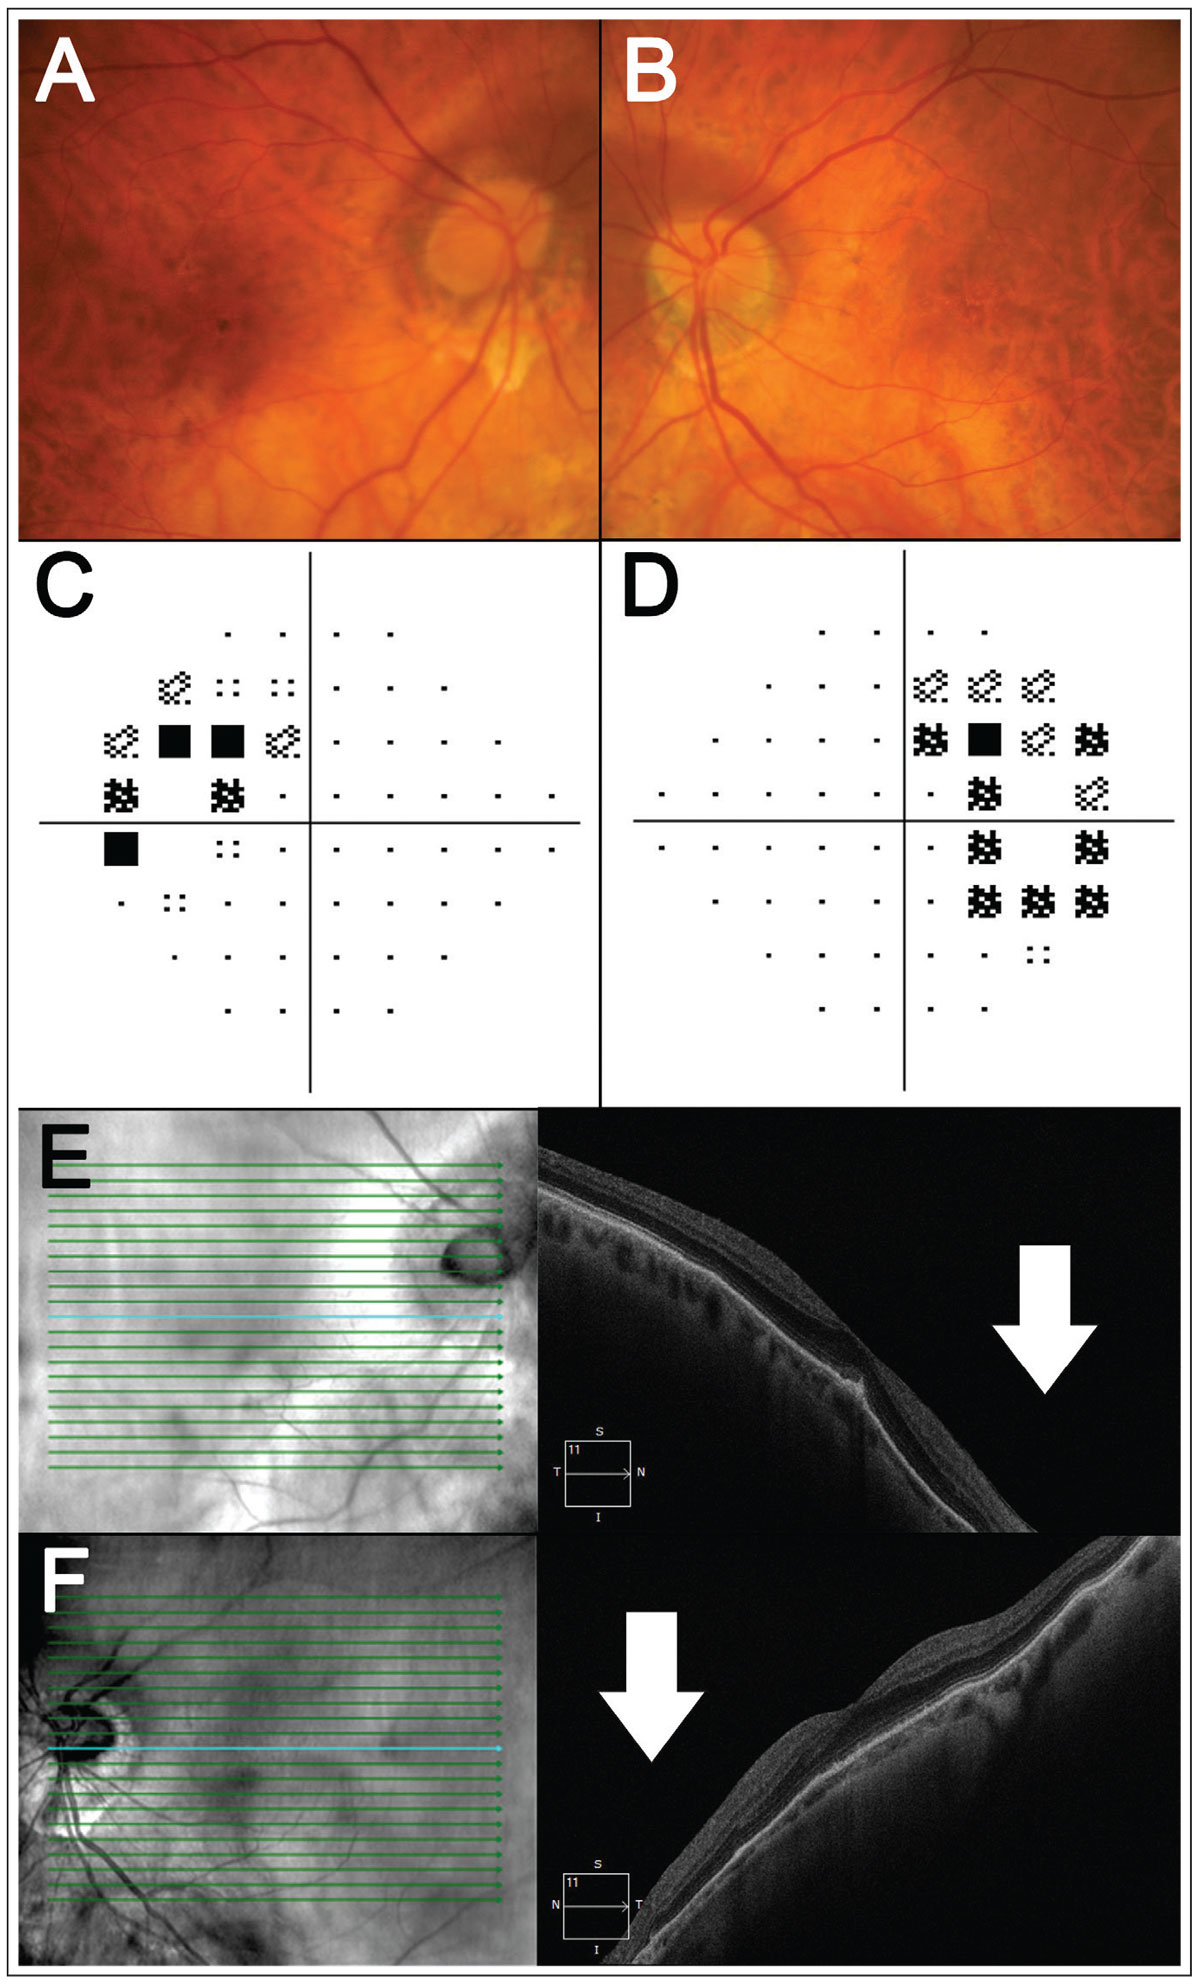 Fig. 1. A patient with bilateral tilted disc syndrome. (A-B) Fundus photography shows tilt and/or oblique insertion of the discs in both eyes with situs invertus of the blood vessels. (C-D) Here, 24-2 visual field testing shows a bitemporal visual field defect. (E-F) Horizontal OCT line scans through the fovea show posterior bowing of the nasal retina relative to the fovea (white arrows), corresponding to the temporal visual field defects.